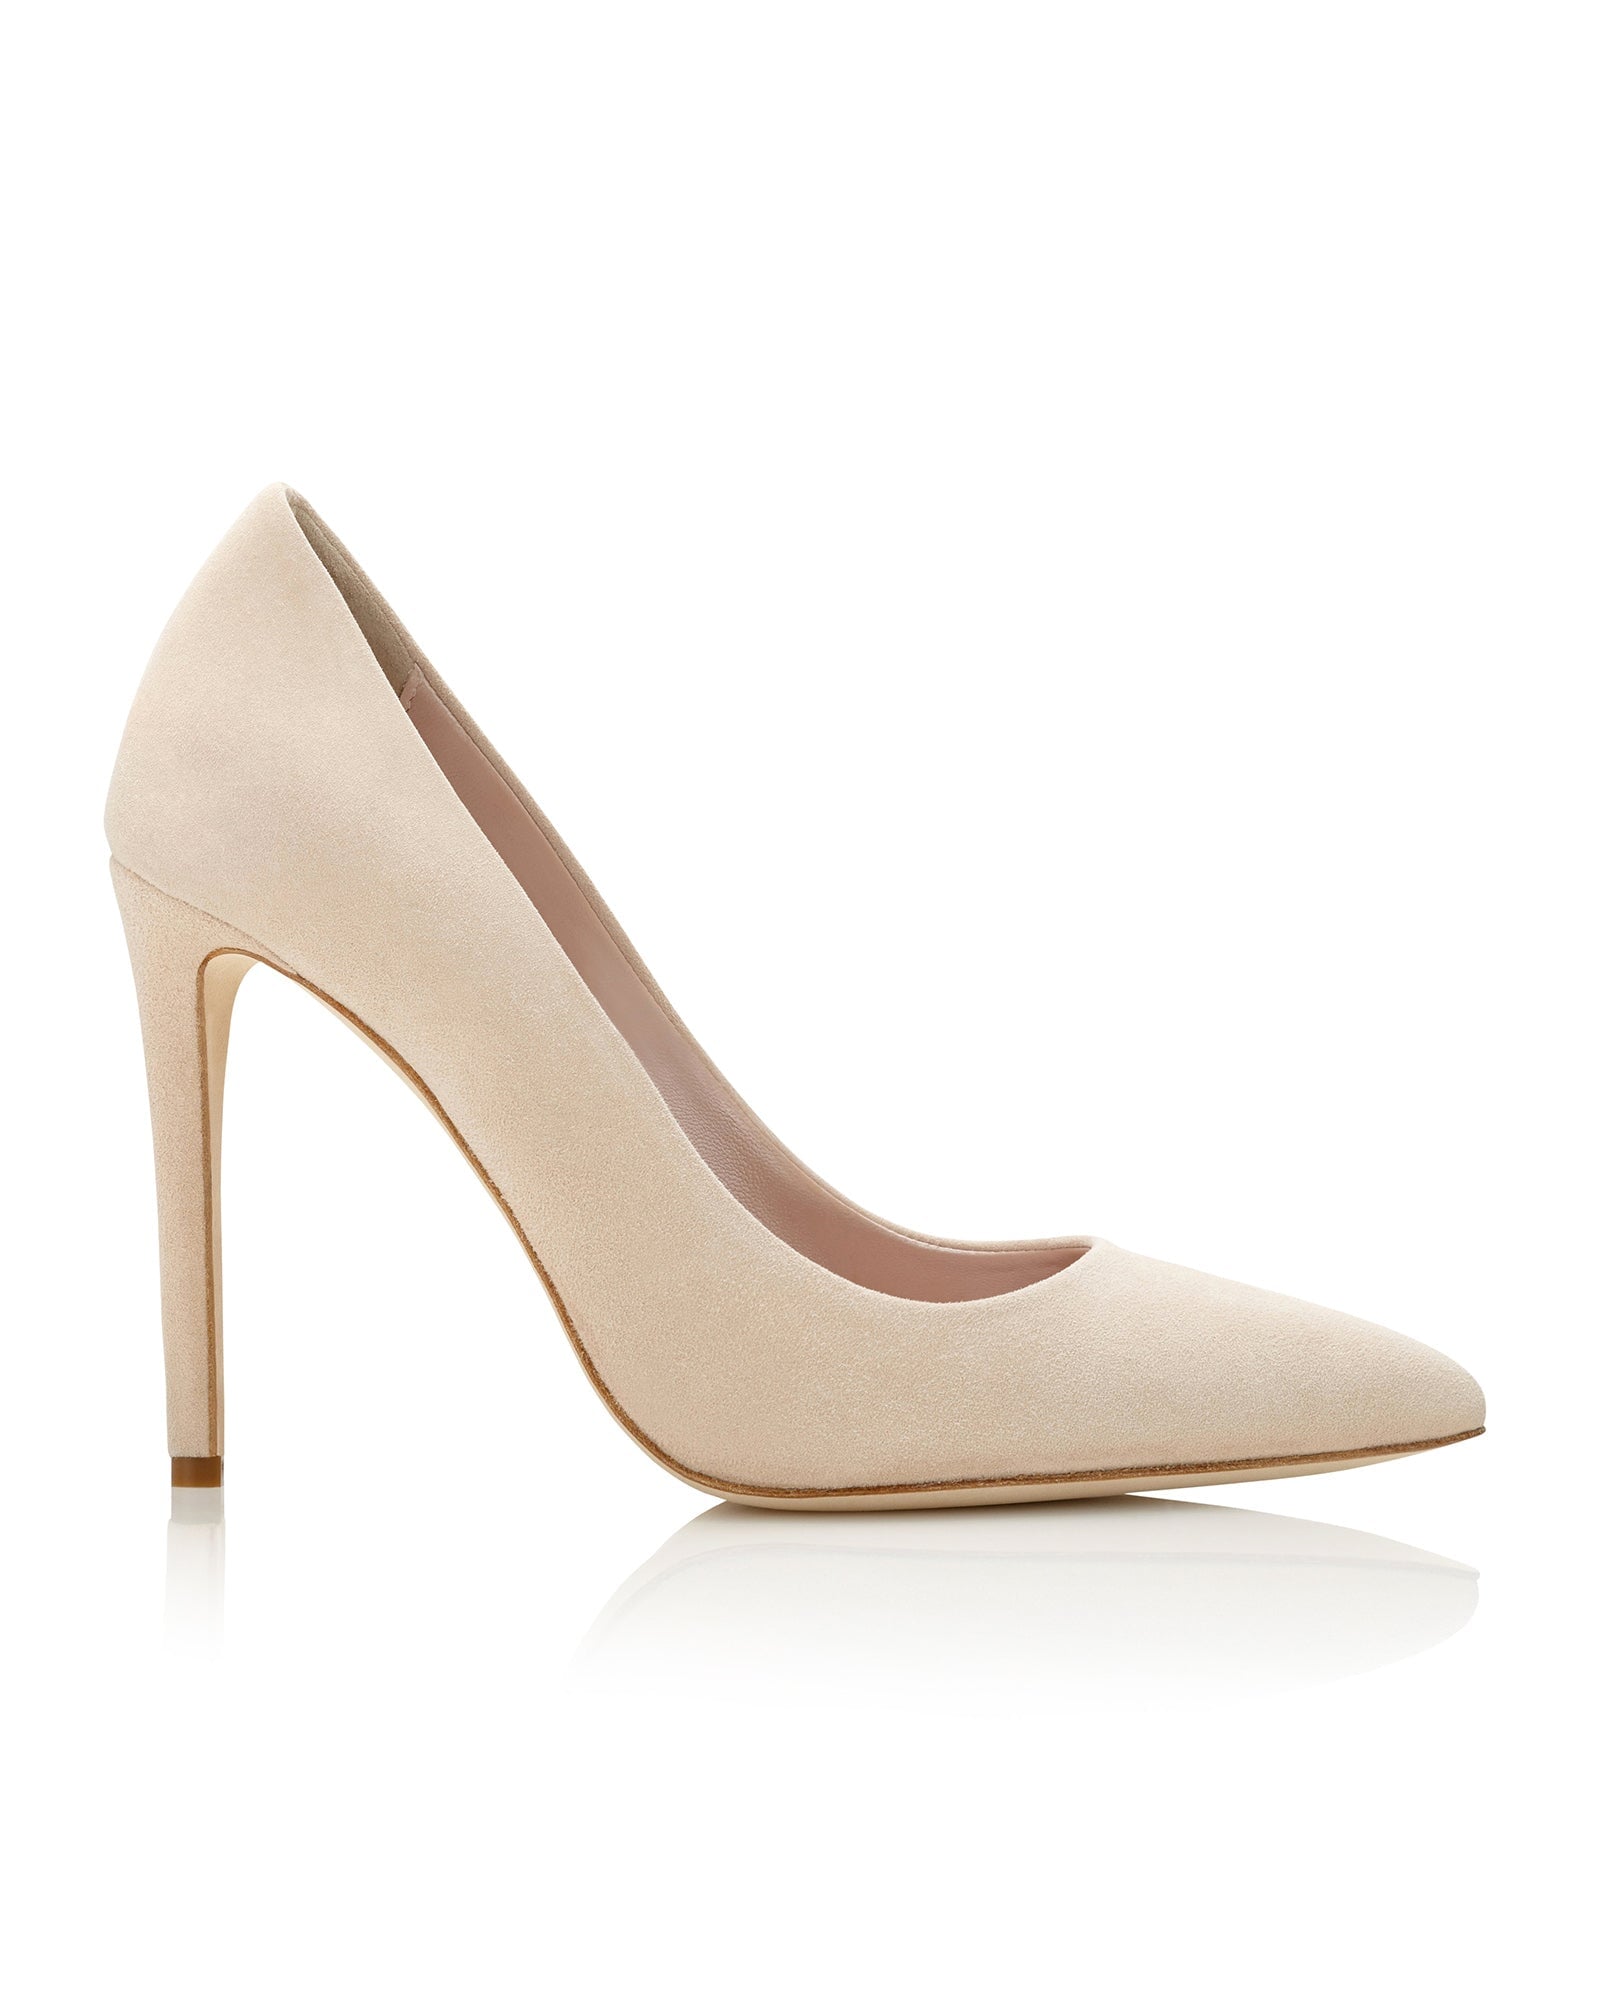 Rebecca Blush Fashion Shoe Nude Suede Pointed Court  image